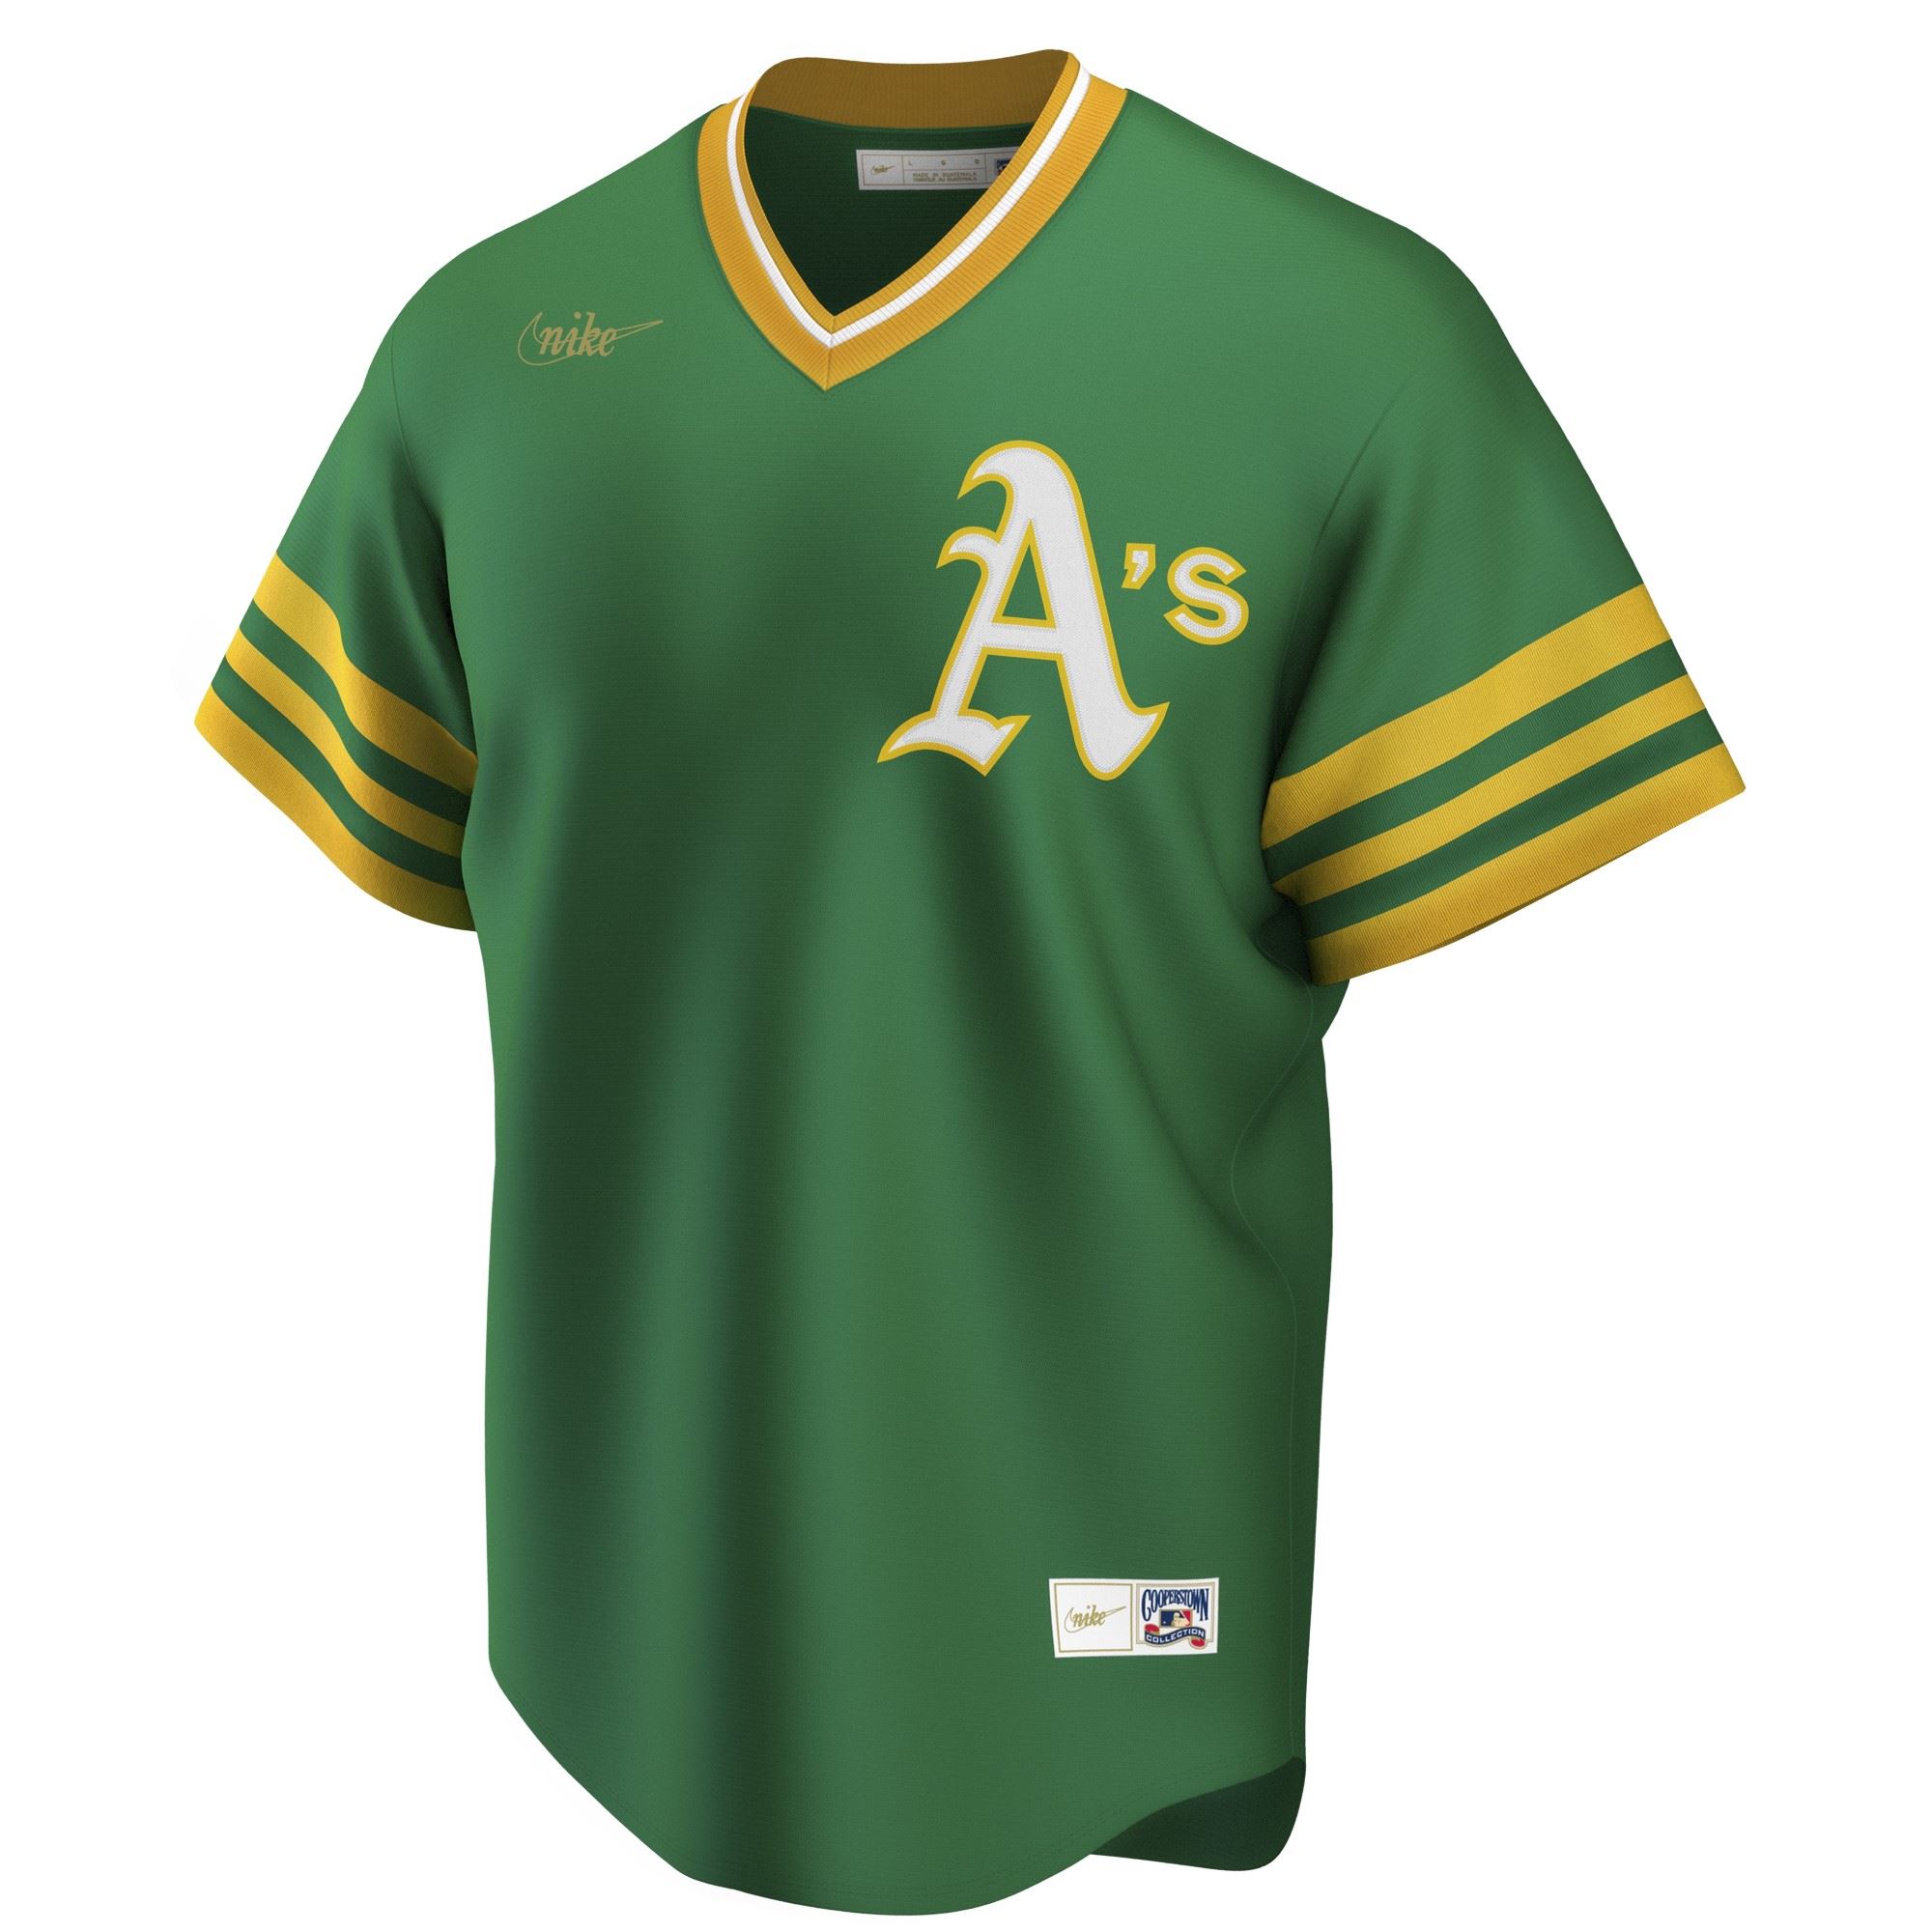 Oakland Athletics Official MLB Cooperstown Jersey Green Nike